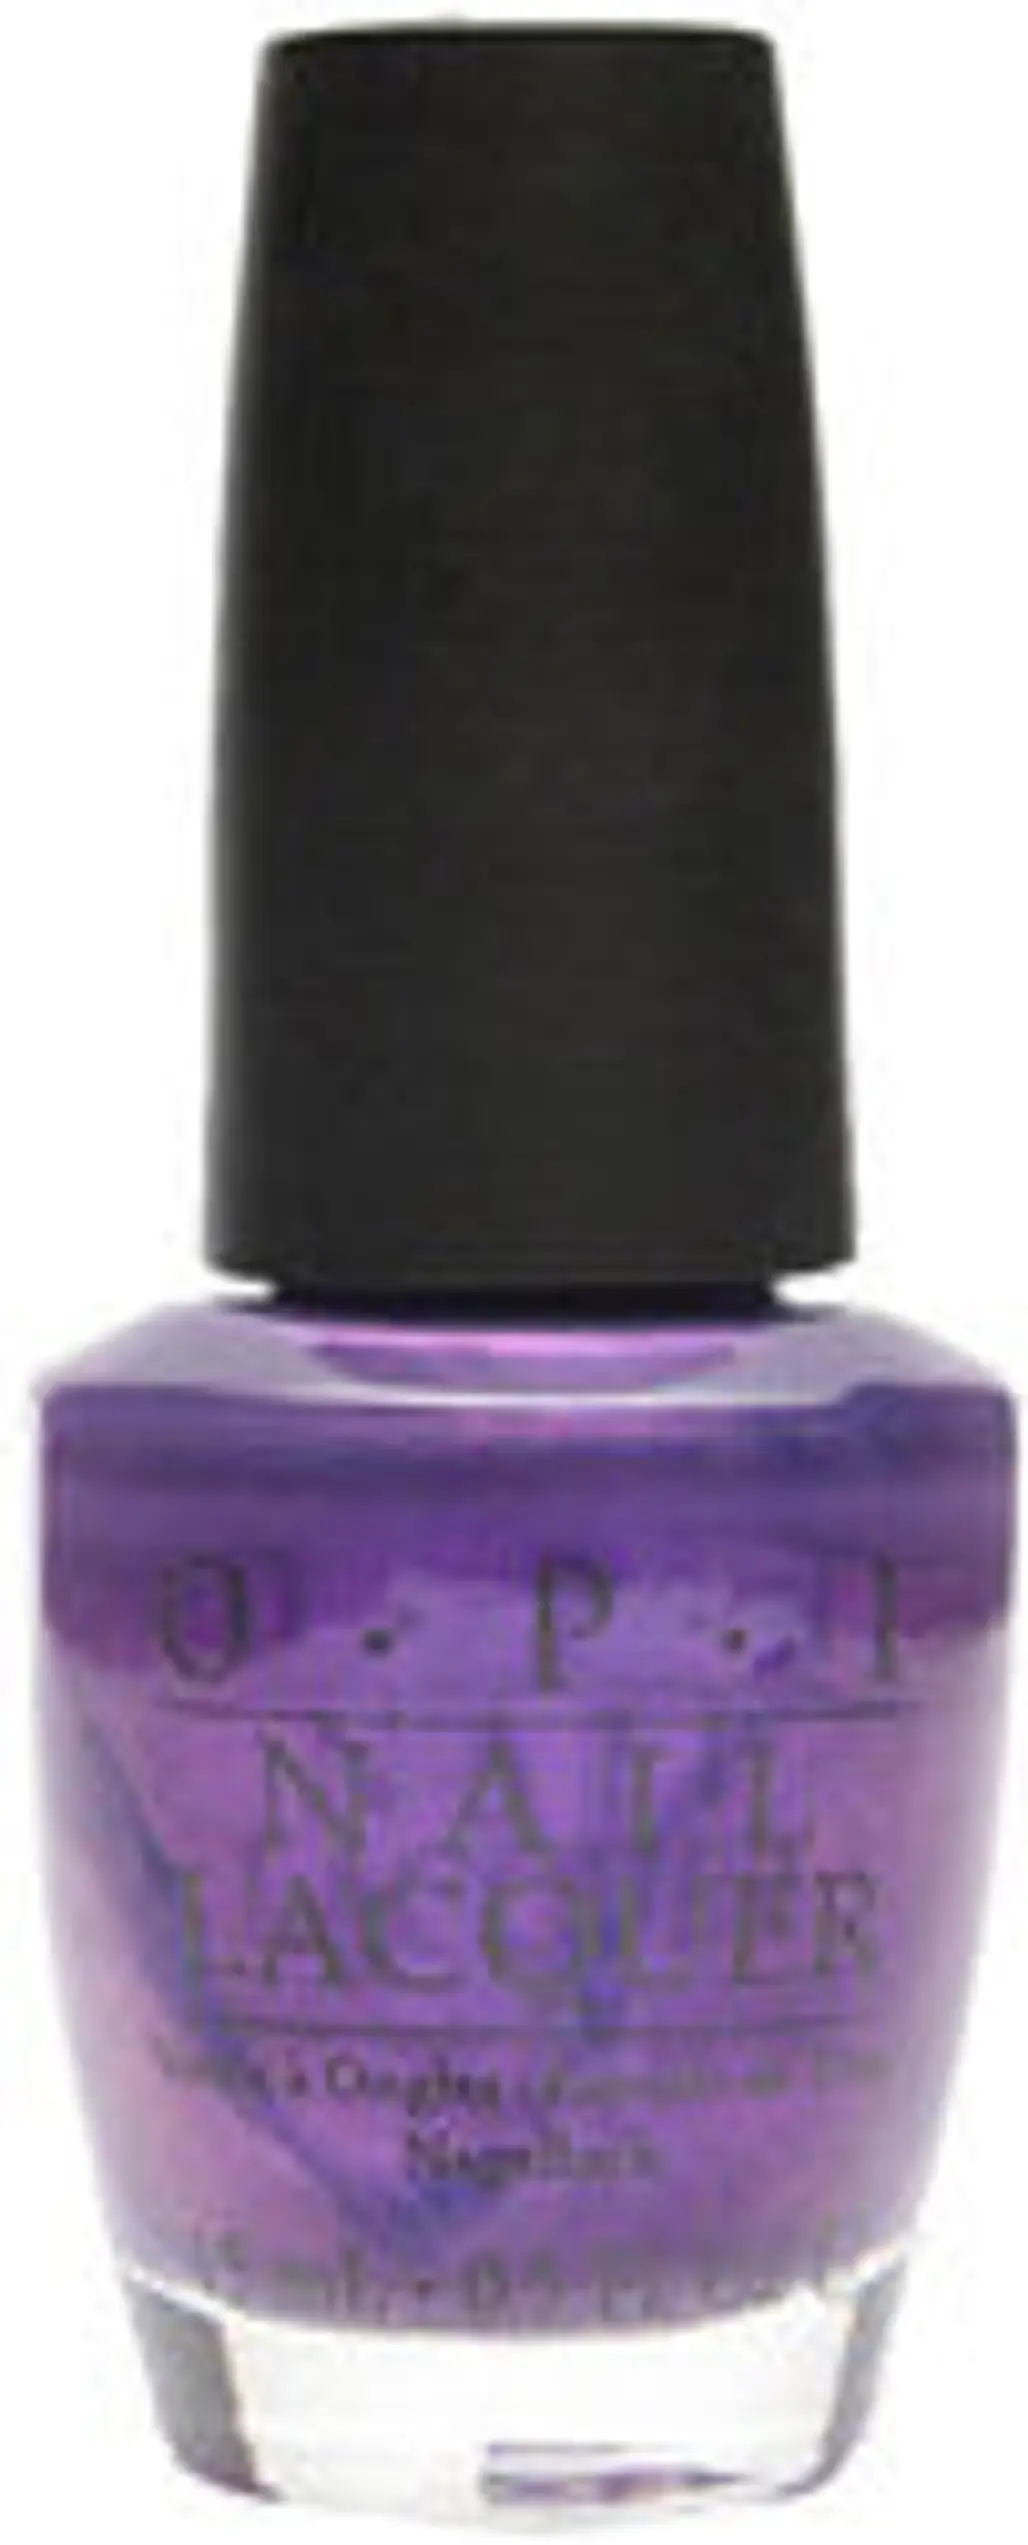 OPI Brights Nail Lacquer in ‘Purple with a Purpose’